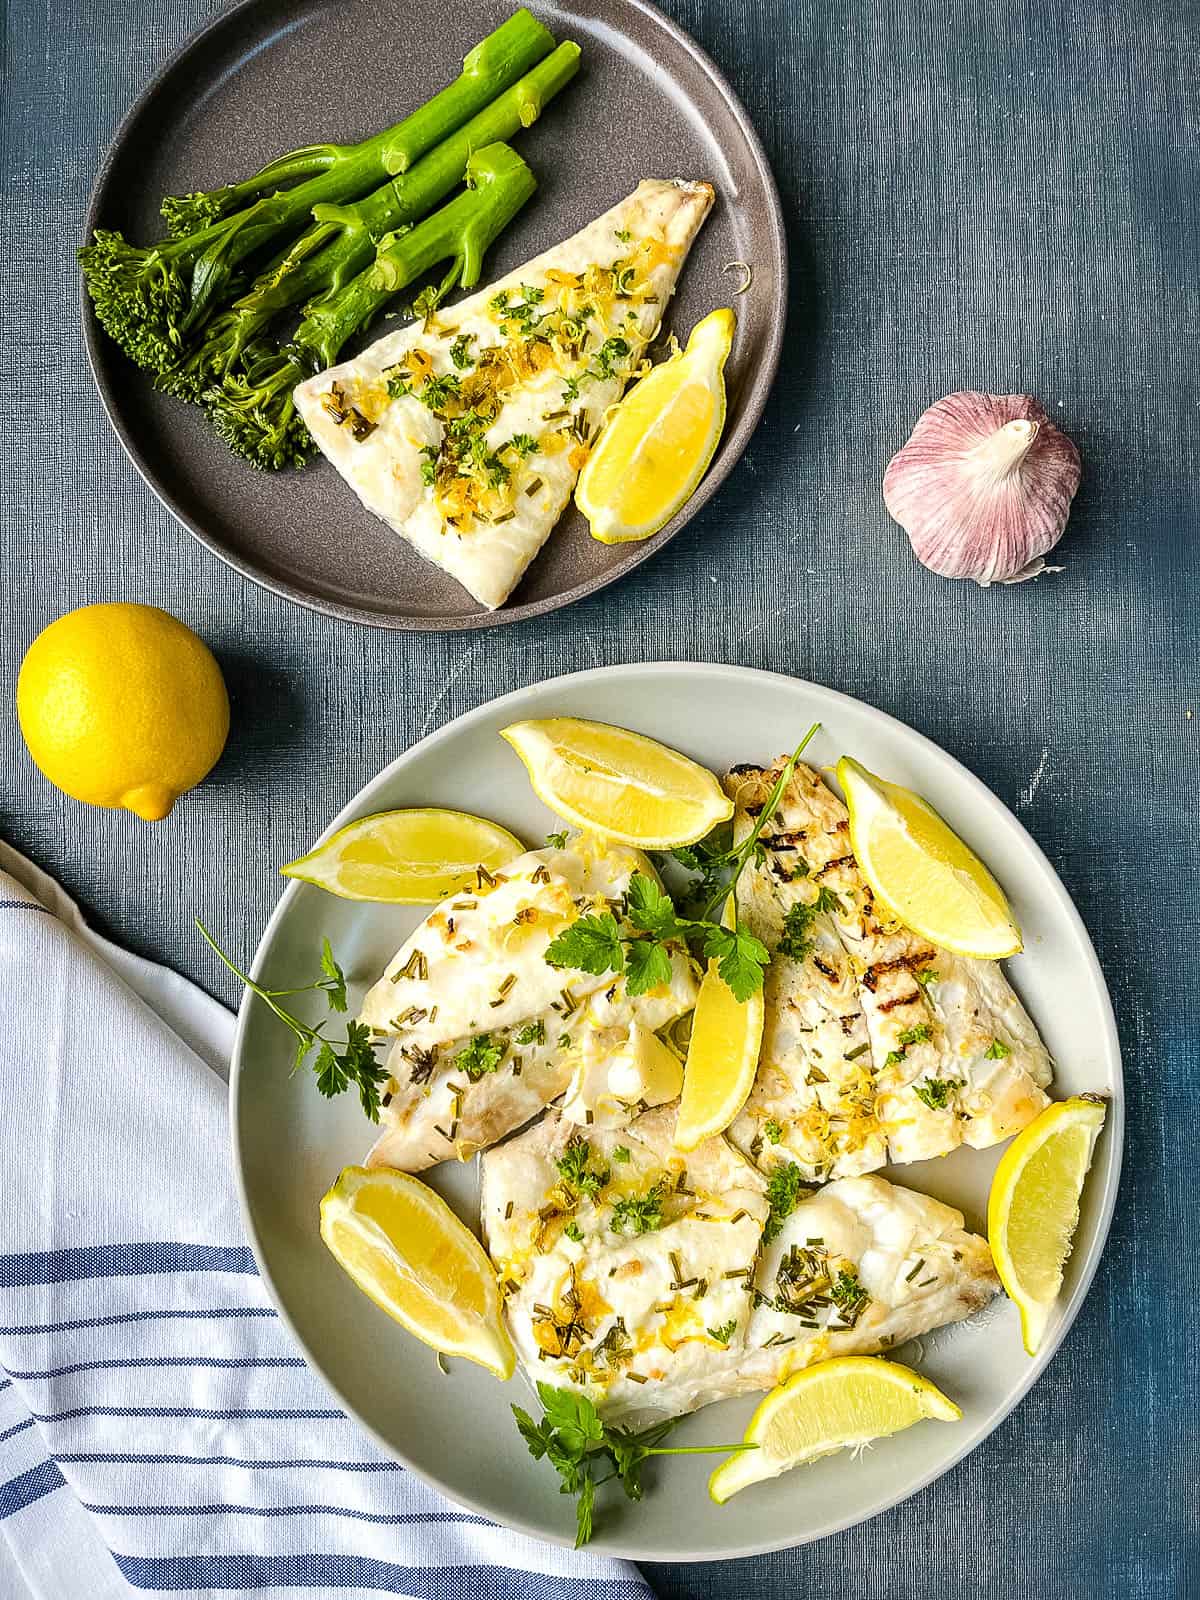 grilled haddock fillets with lemon wedges and dressed with fresh parsley and lemon zest